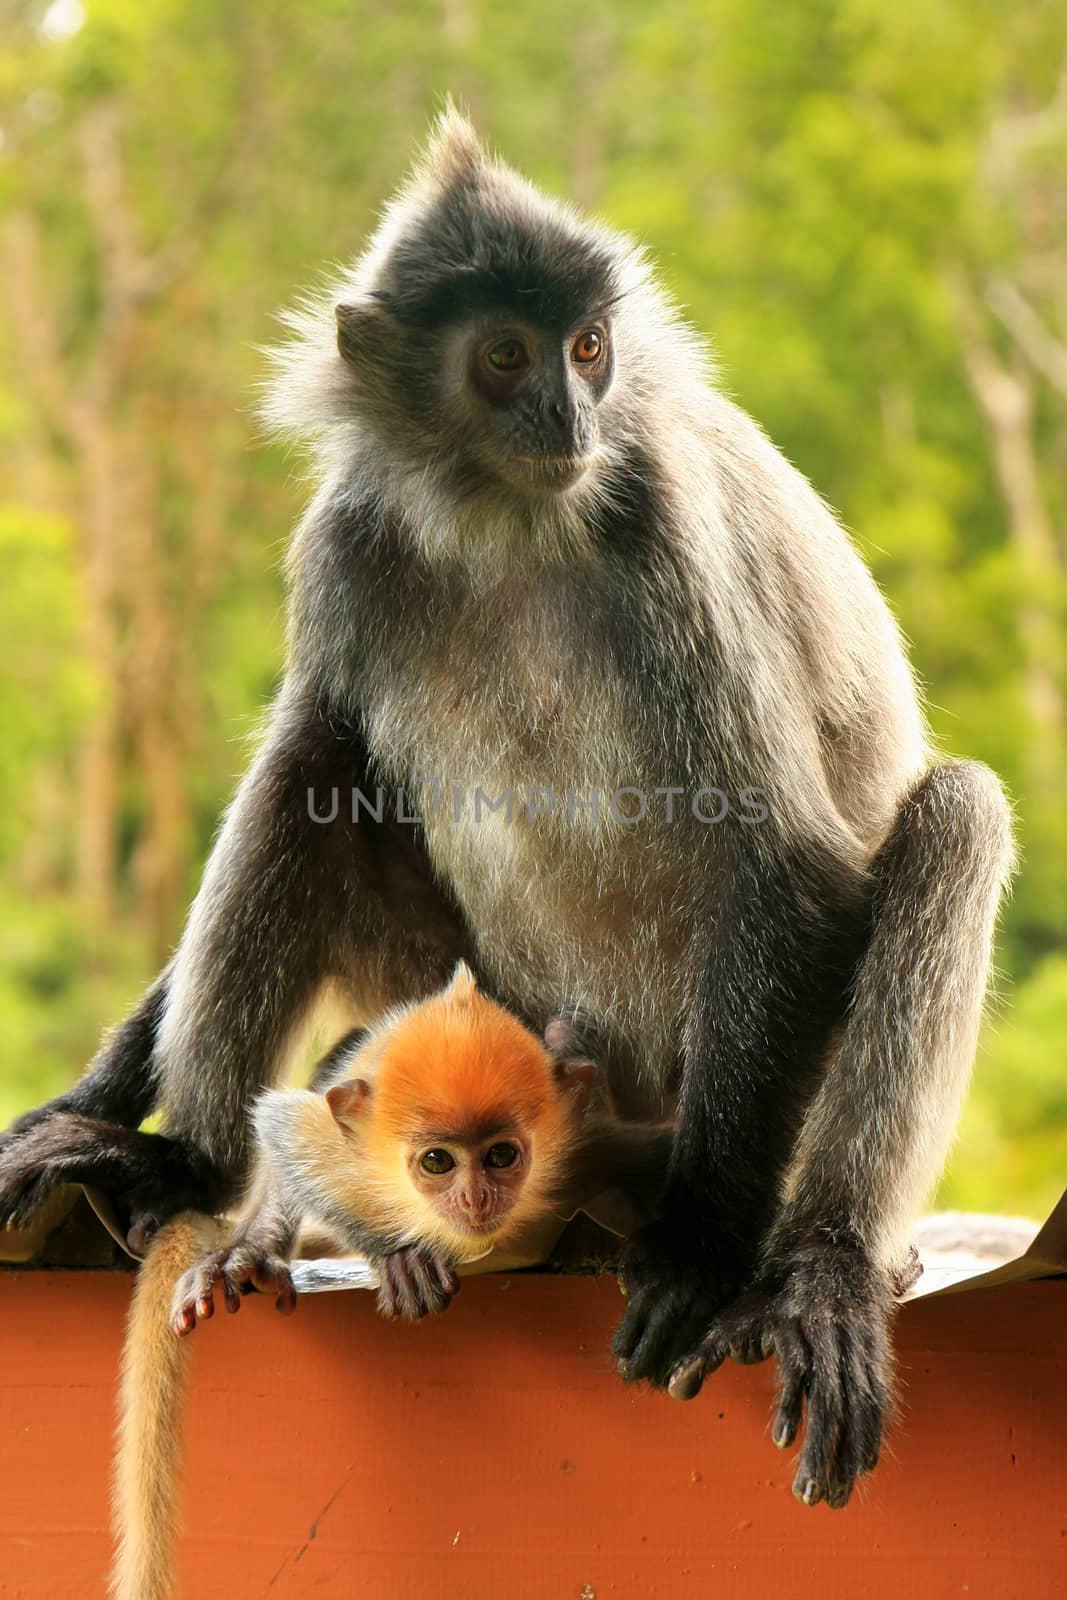 Silvered leaf monkey with a young baby, Sepilok, Borneo, Malaysia